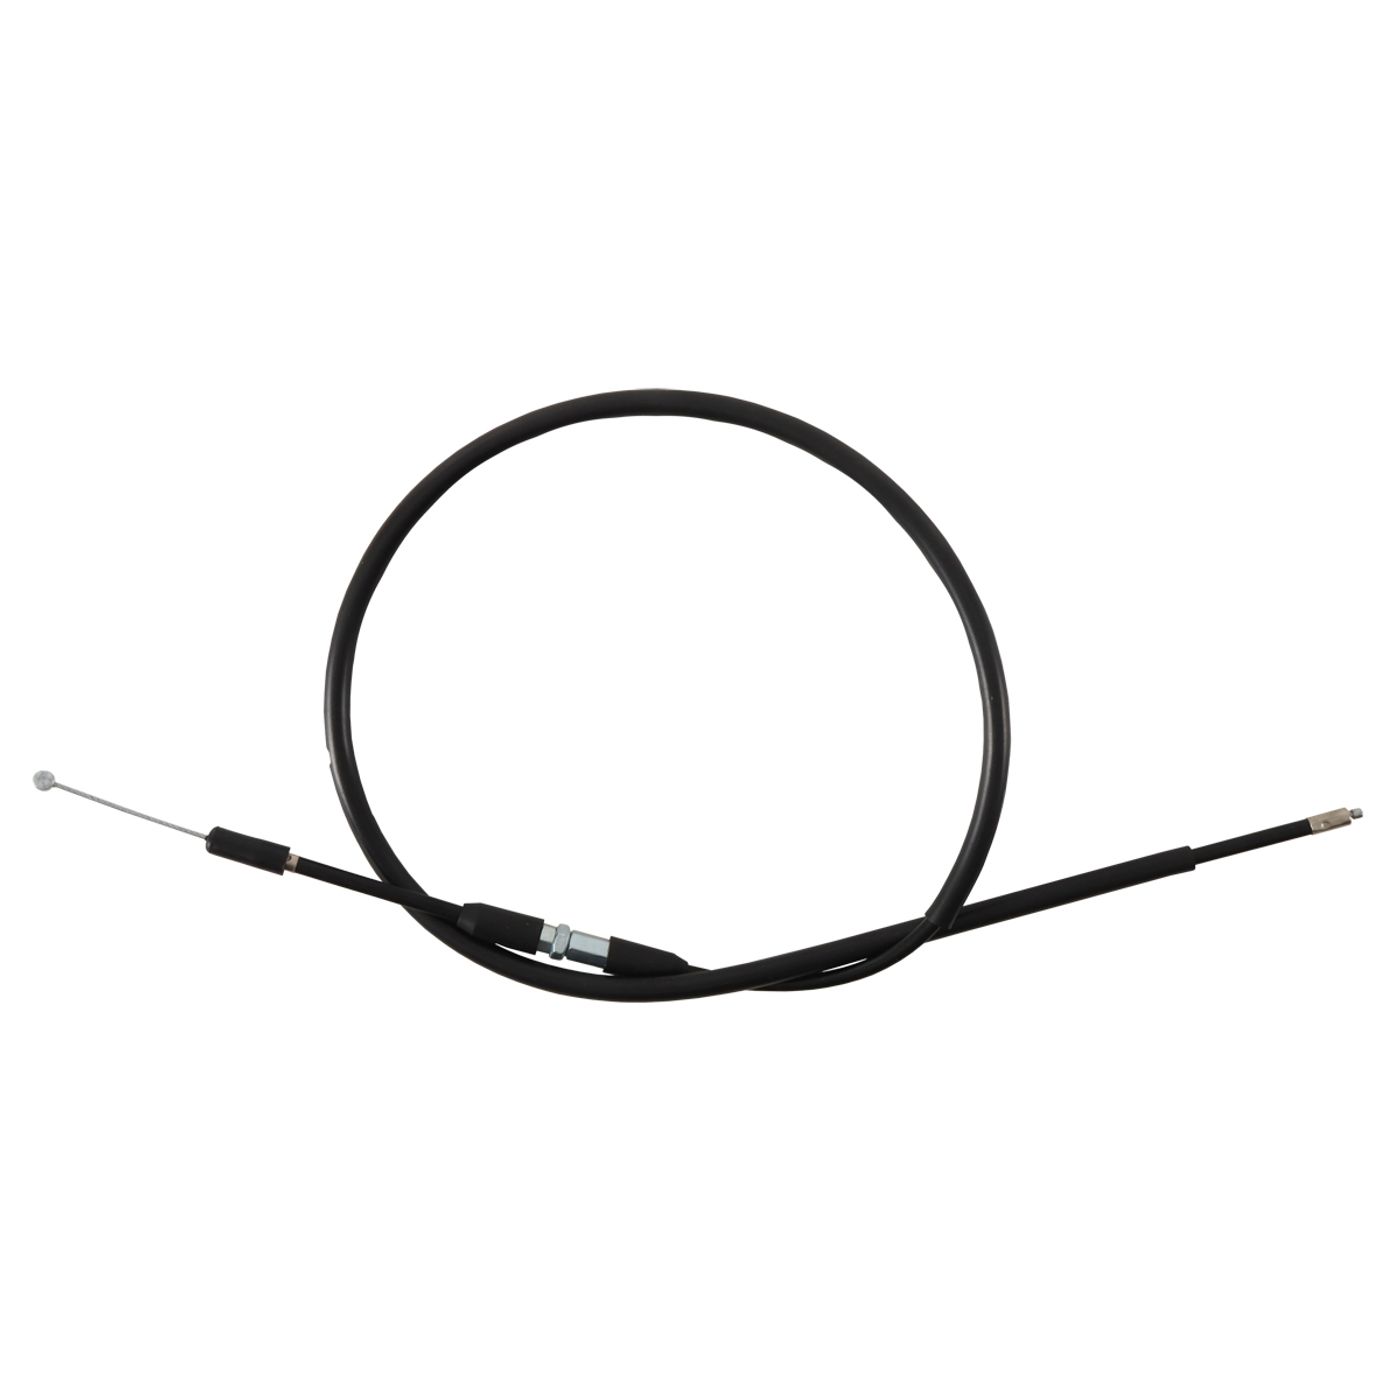 Wrp Clutch Cables - WRP453001 image